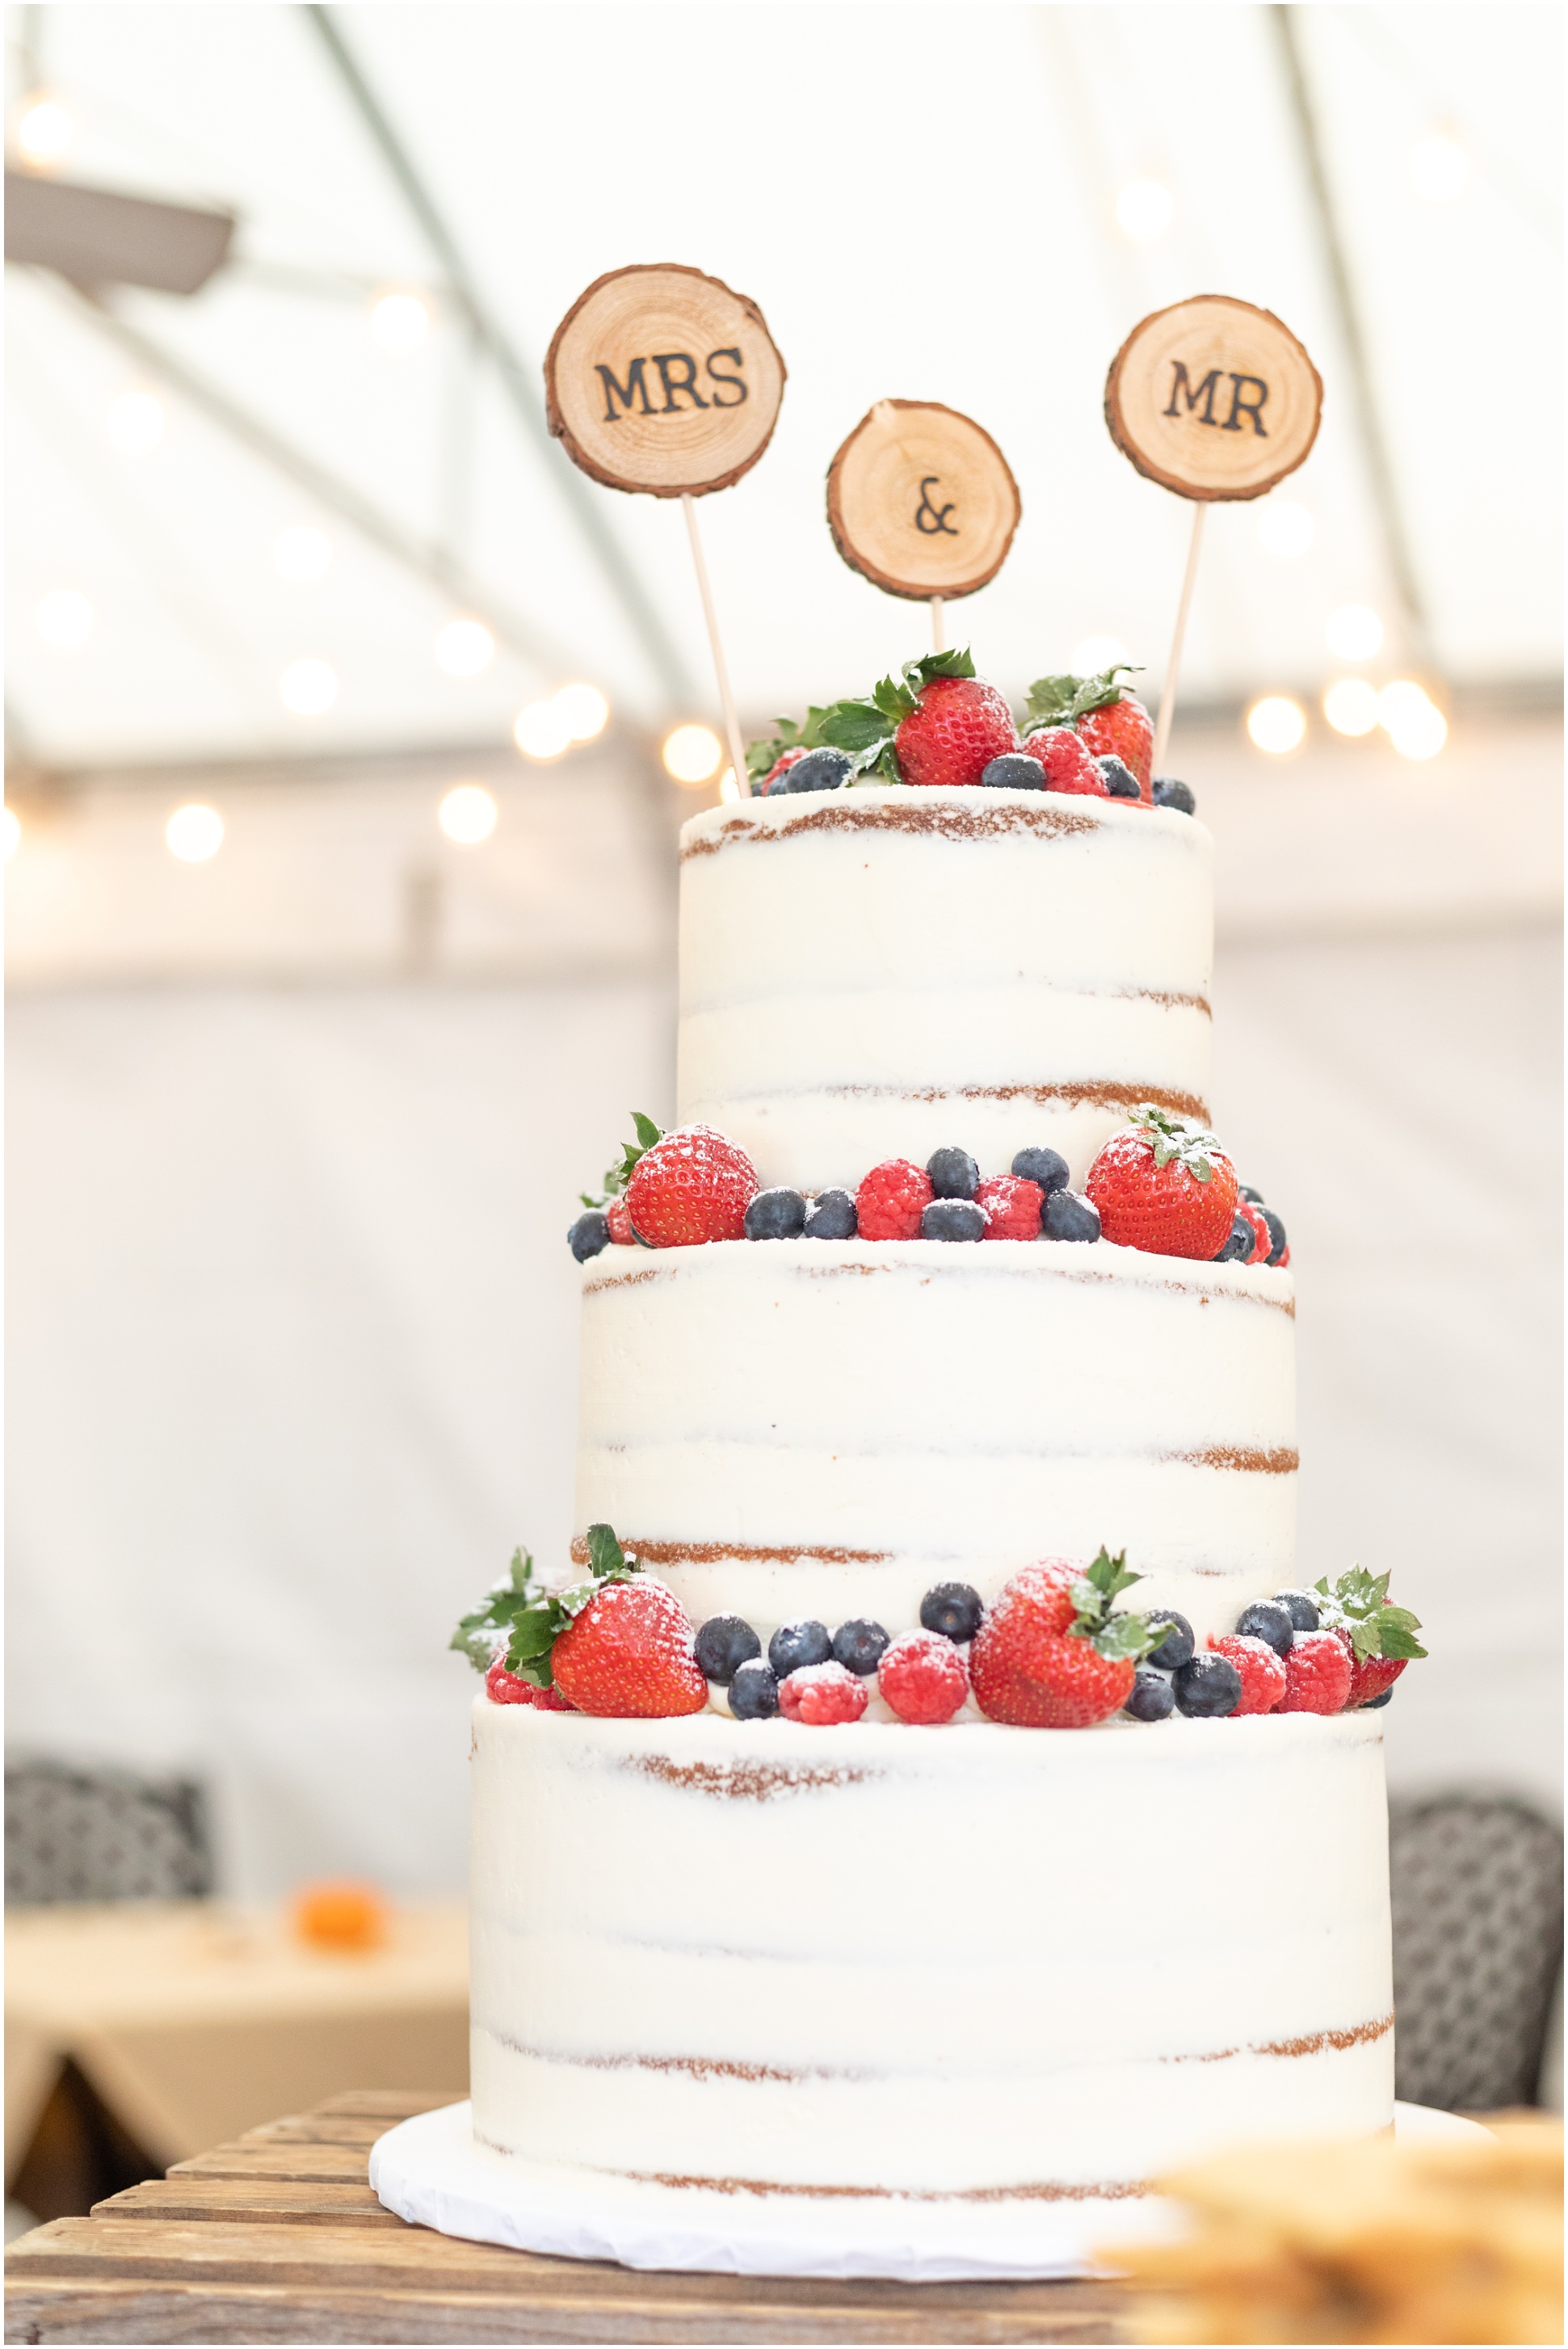 Partial Naked Cake with Fresh Fruits and a Mr. and Mrs. Cake Topper